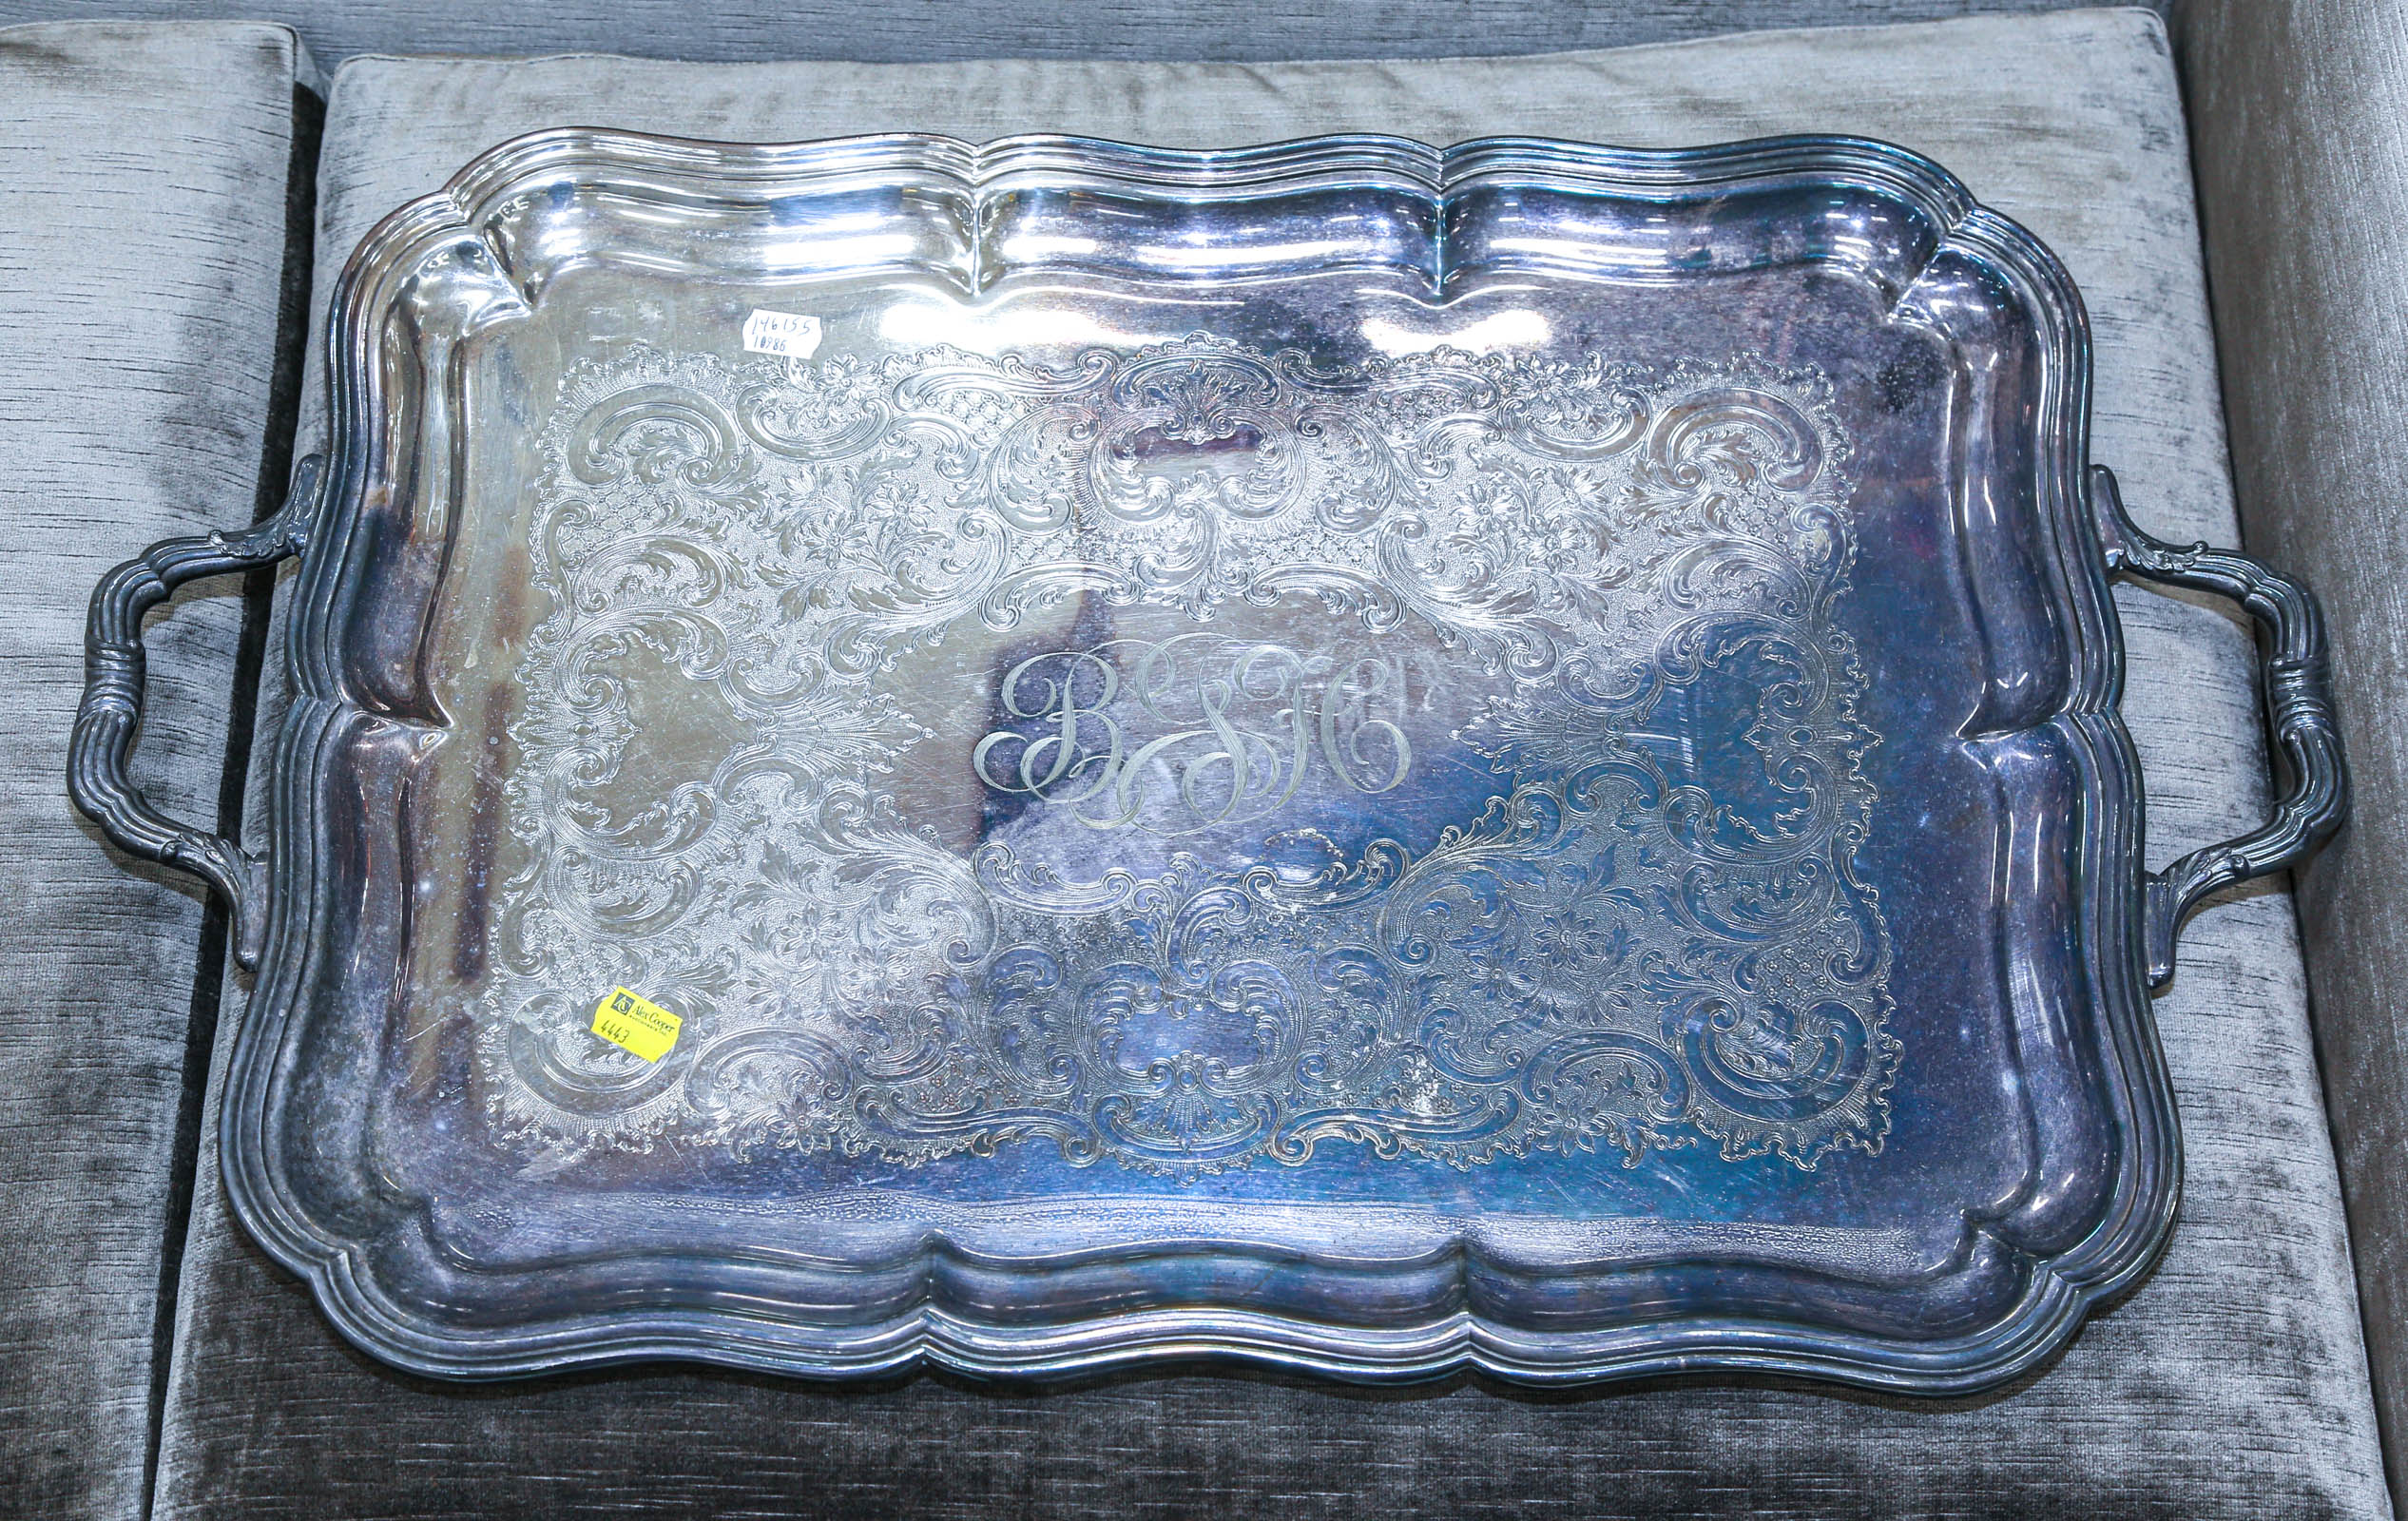 GORHAM SILVER PLATED SERVING TRAY 2e8ce0